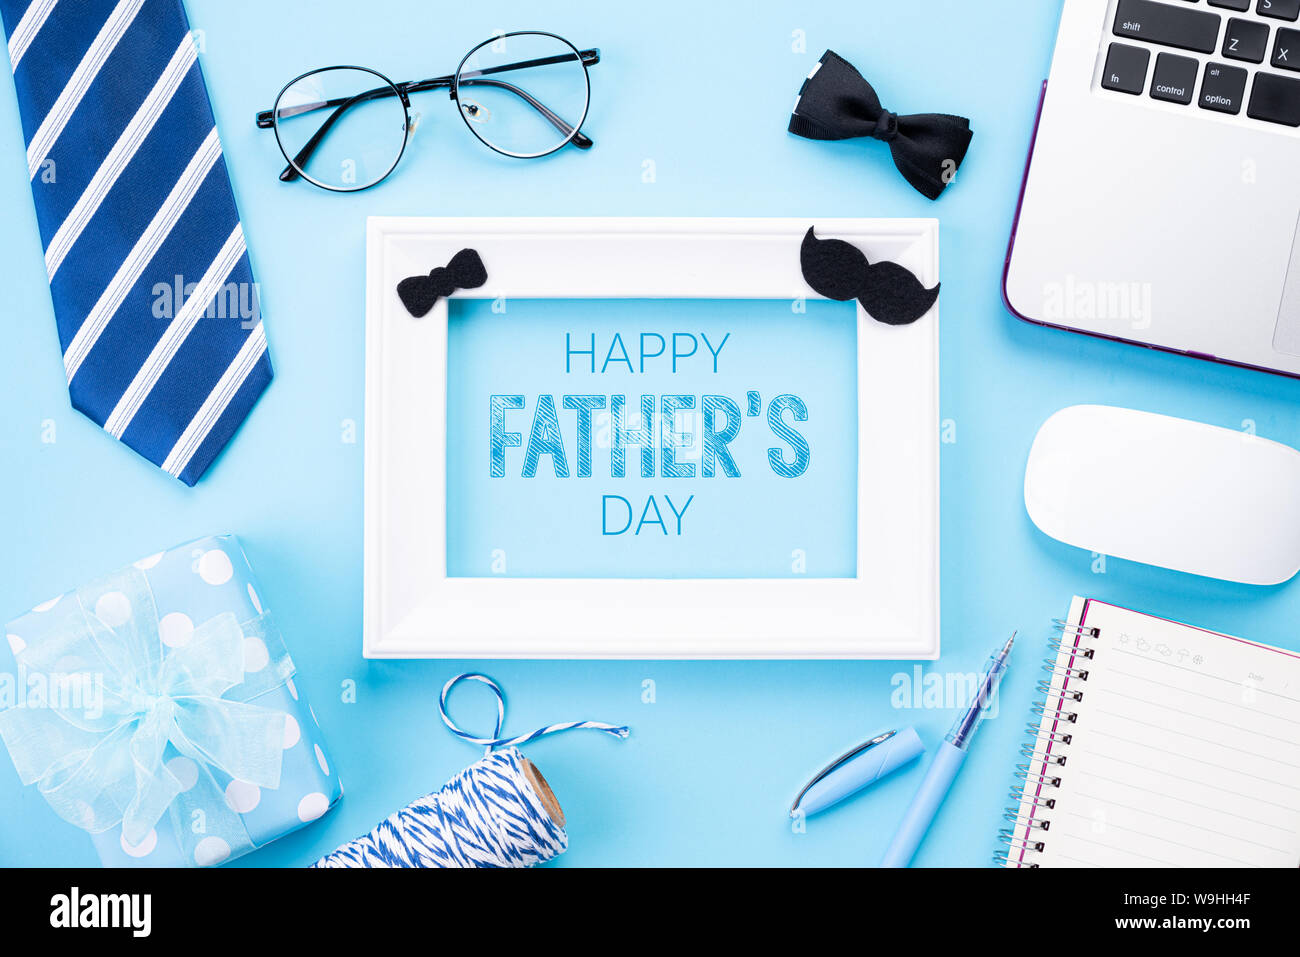 Happy Fathers Day Concept Top View Of Blue Tie Beautiful Gift Box Laptop Computer White Picture Frame With Happy Father S Day Text On Bright Blue Stock Photo Alamy